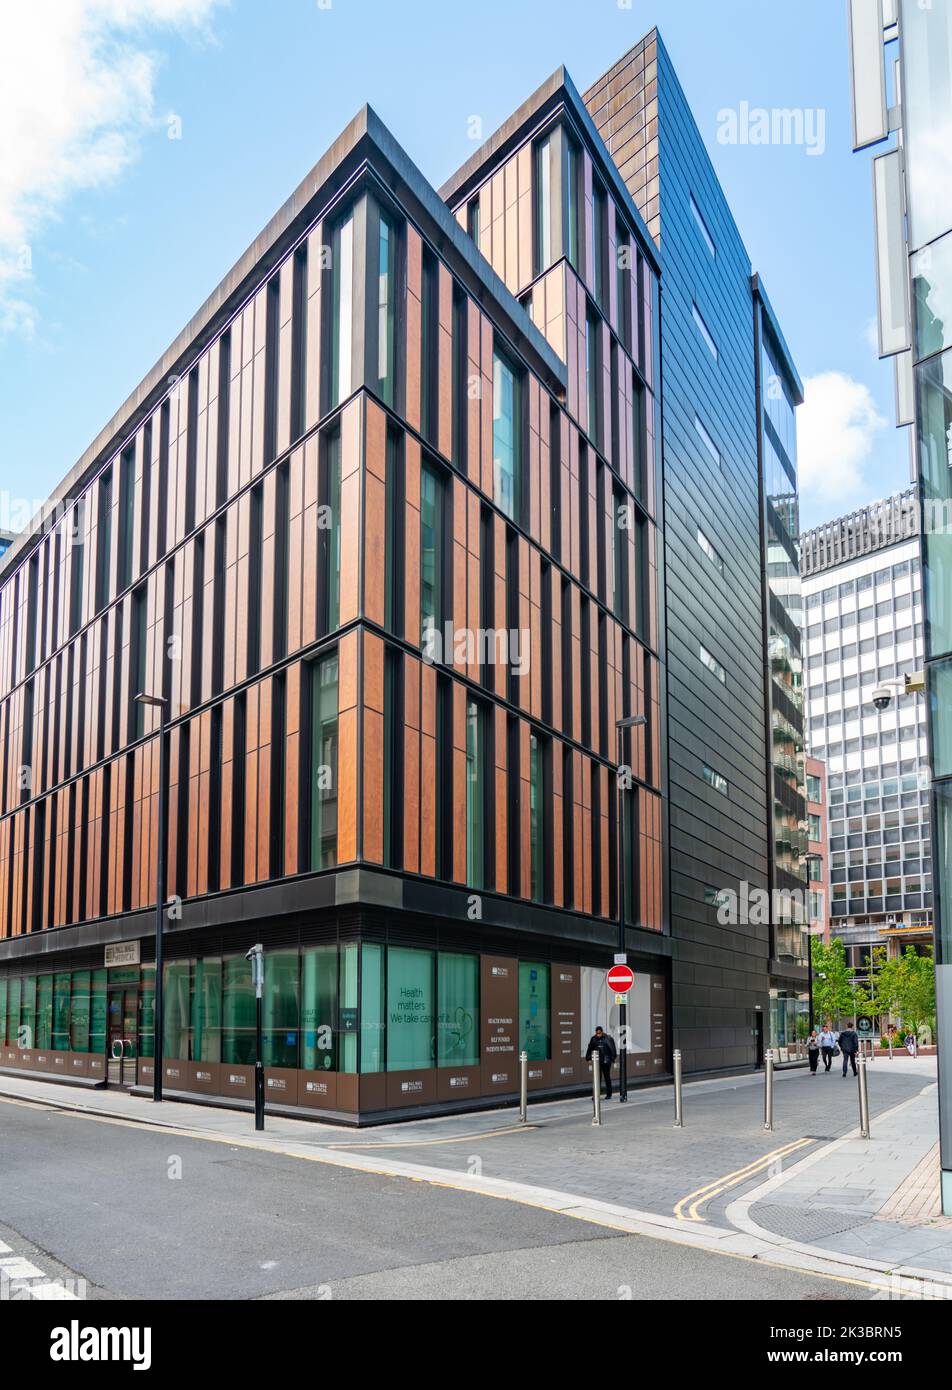 Pall Mall Medical, St Paul's Square, Liverpool. This image taken in July 2022. Stock Photo